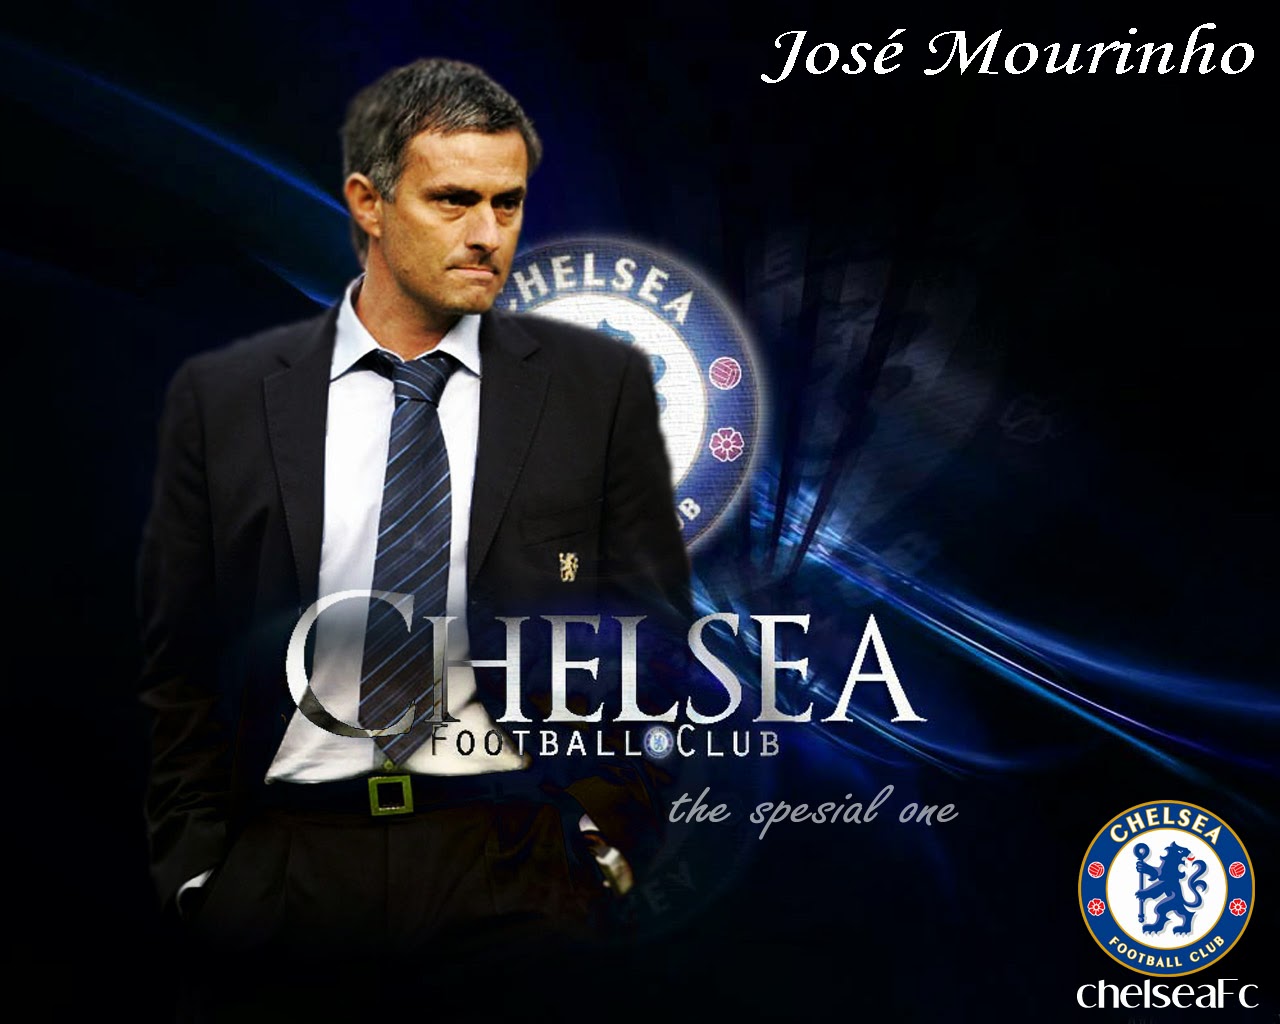 Download Jose Mourinho The Spesial One Chelsea Player Football